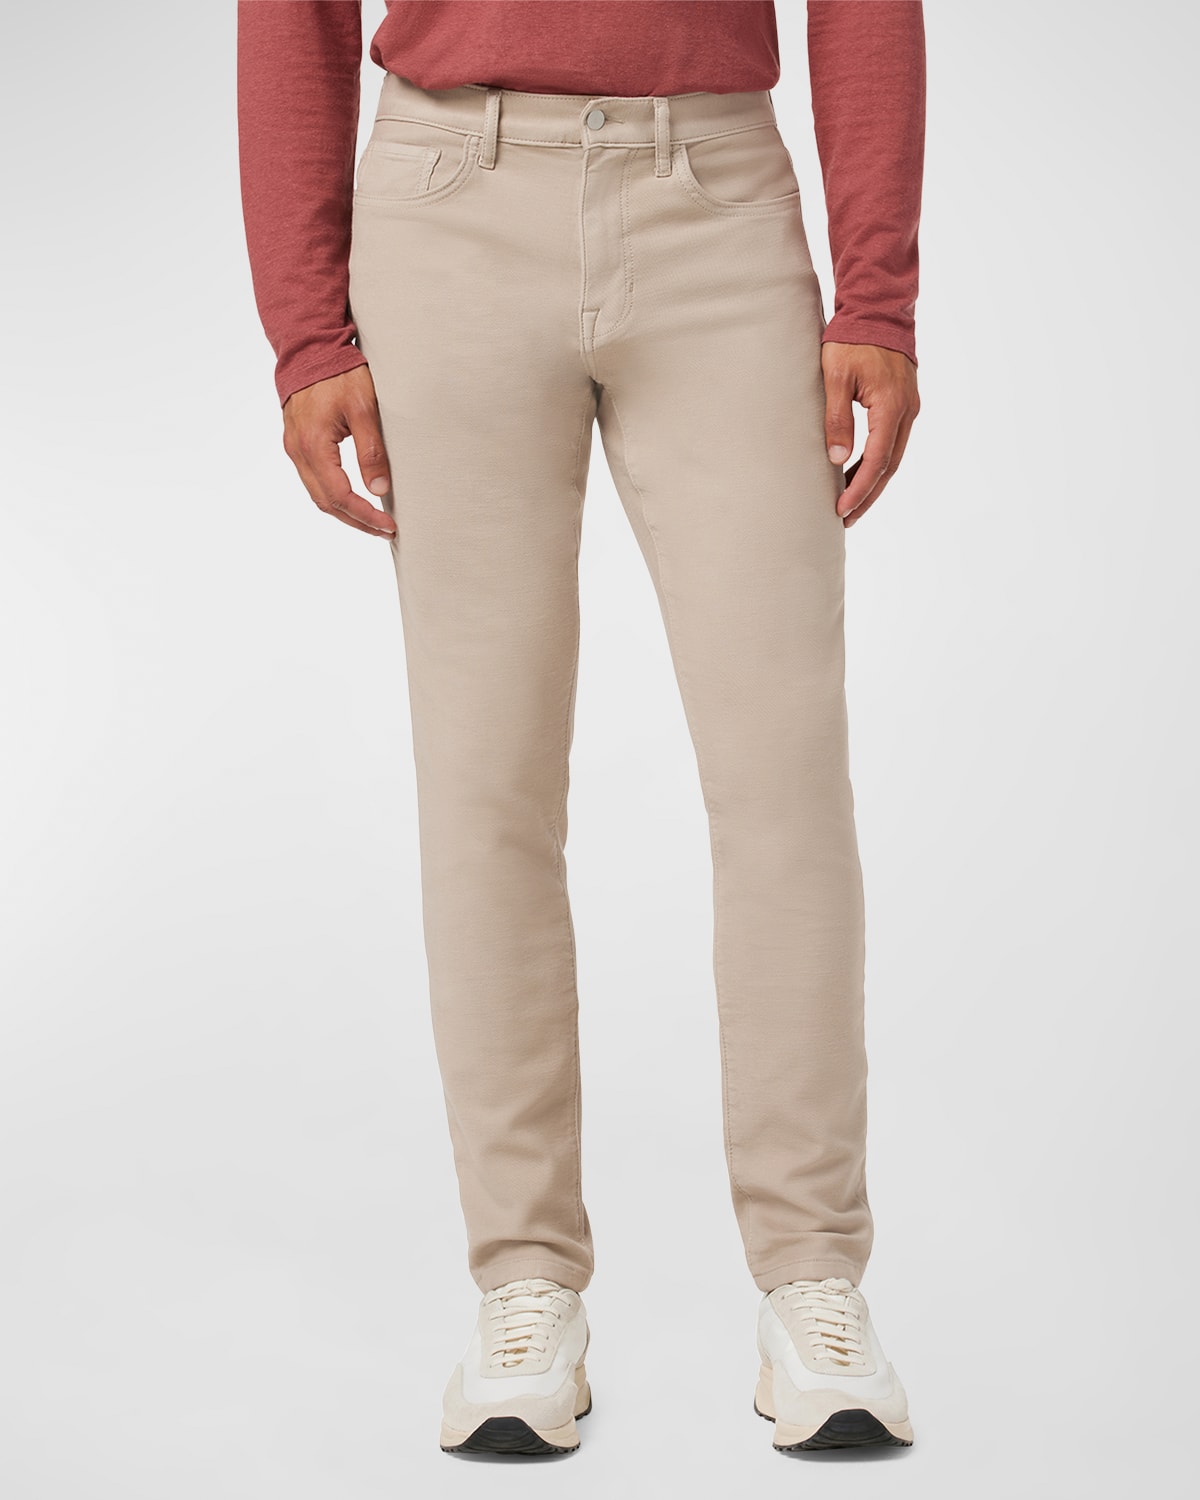 Joe's Jeans The Airsoft Asher French Terry Slim Fit Pants In Cobblestone